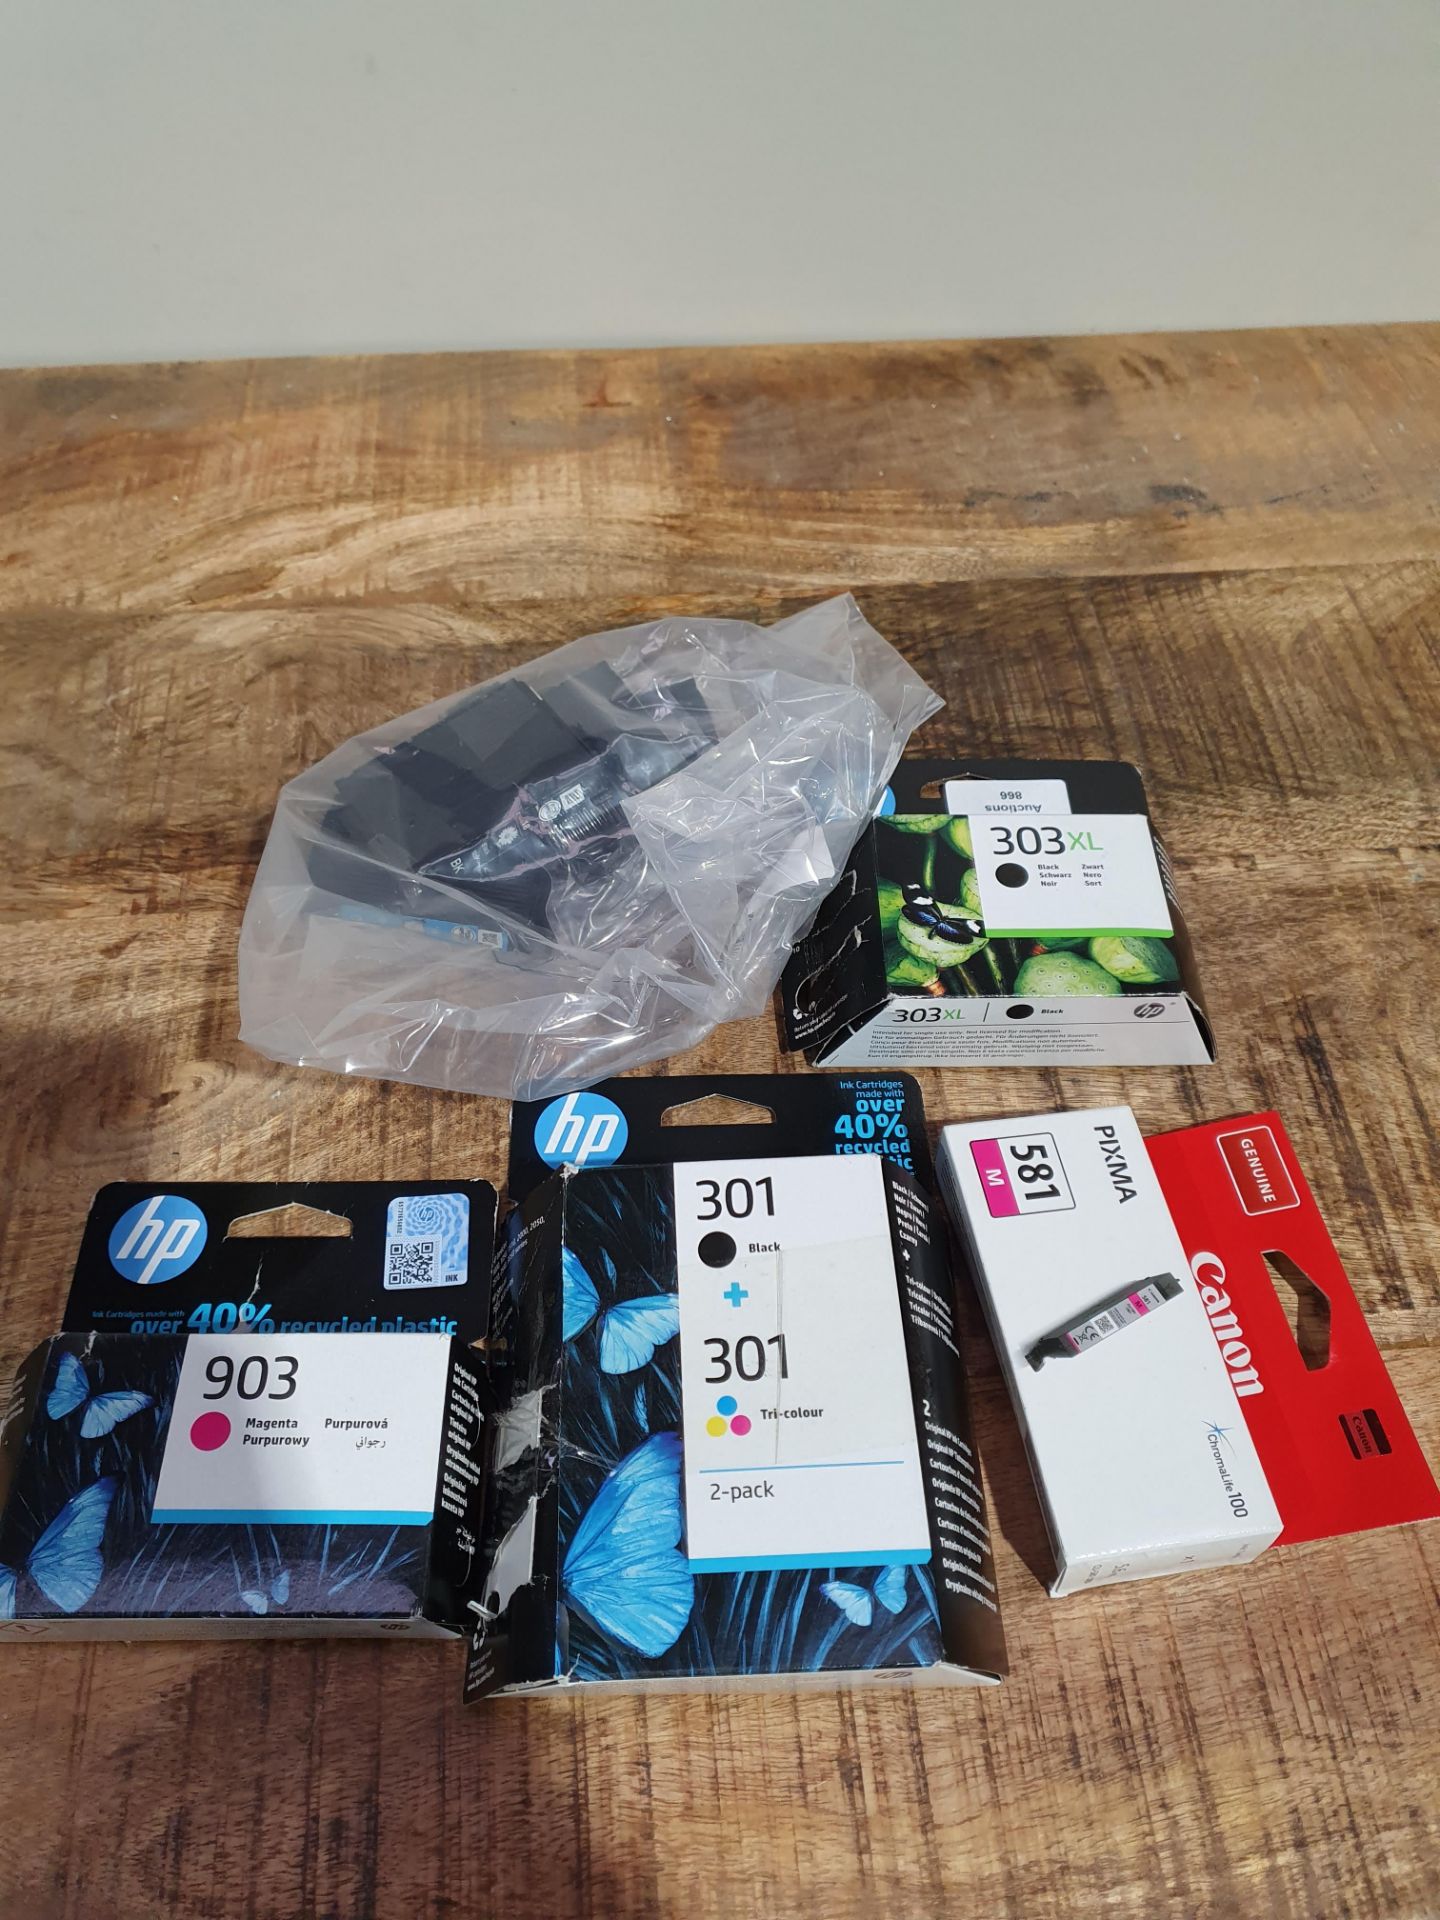 X 5 INKS HP 903, 301, 303, CANON 581 AND OTHERCondition ReportAppraisal Available on Request - All